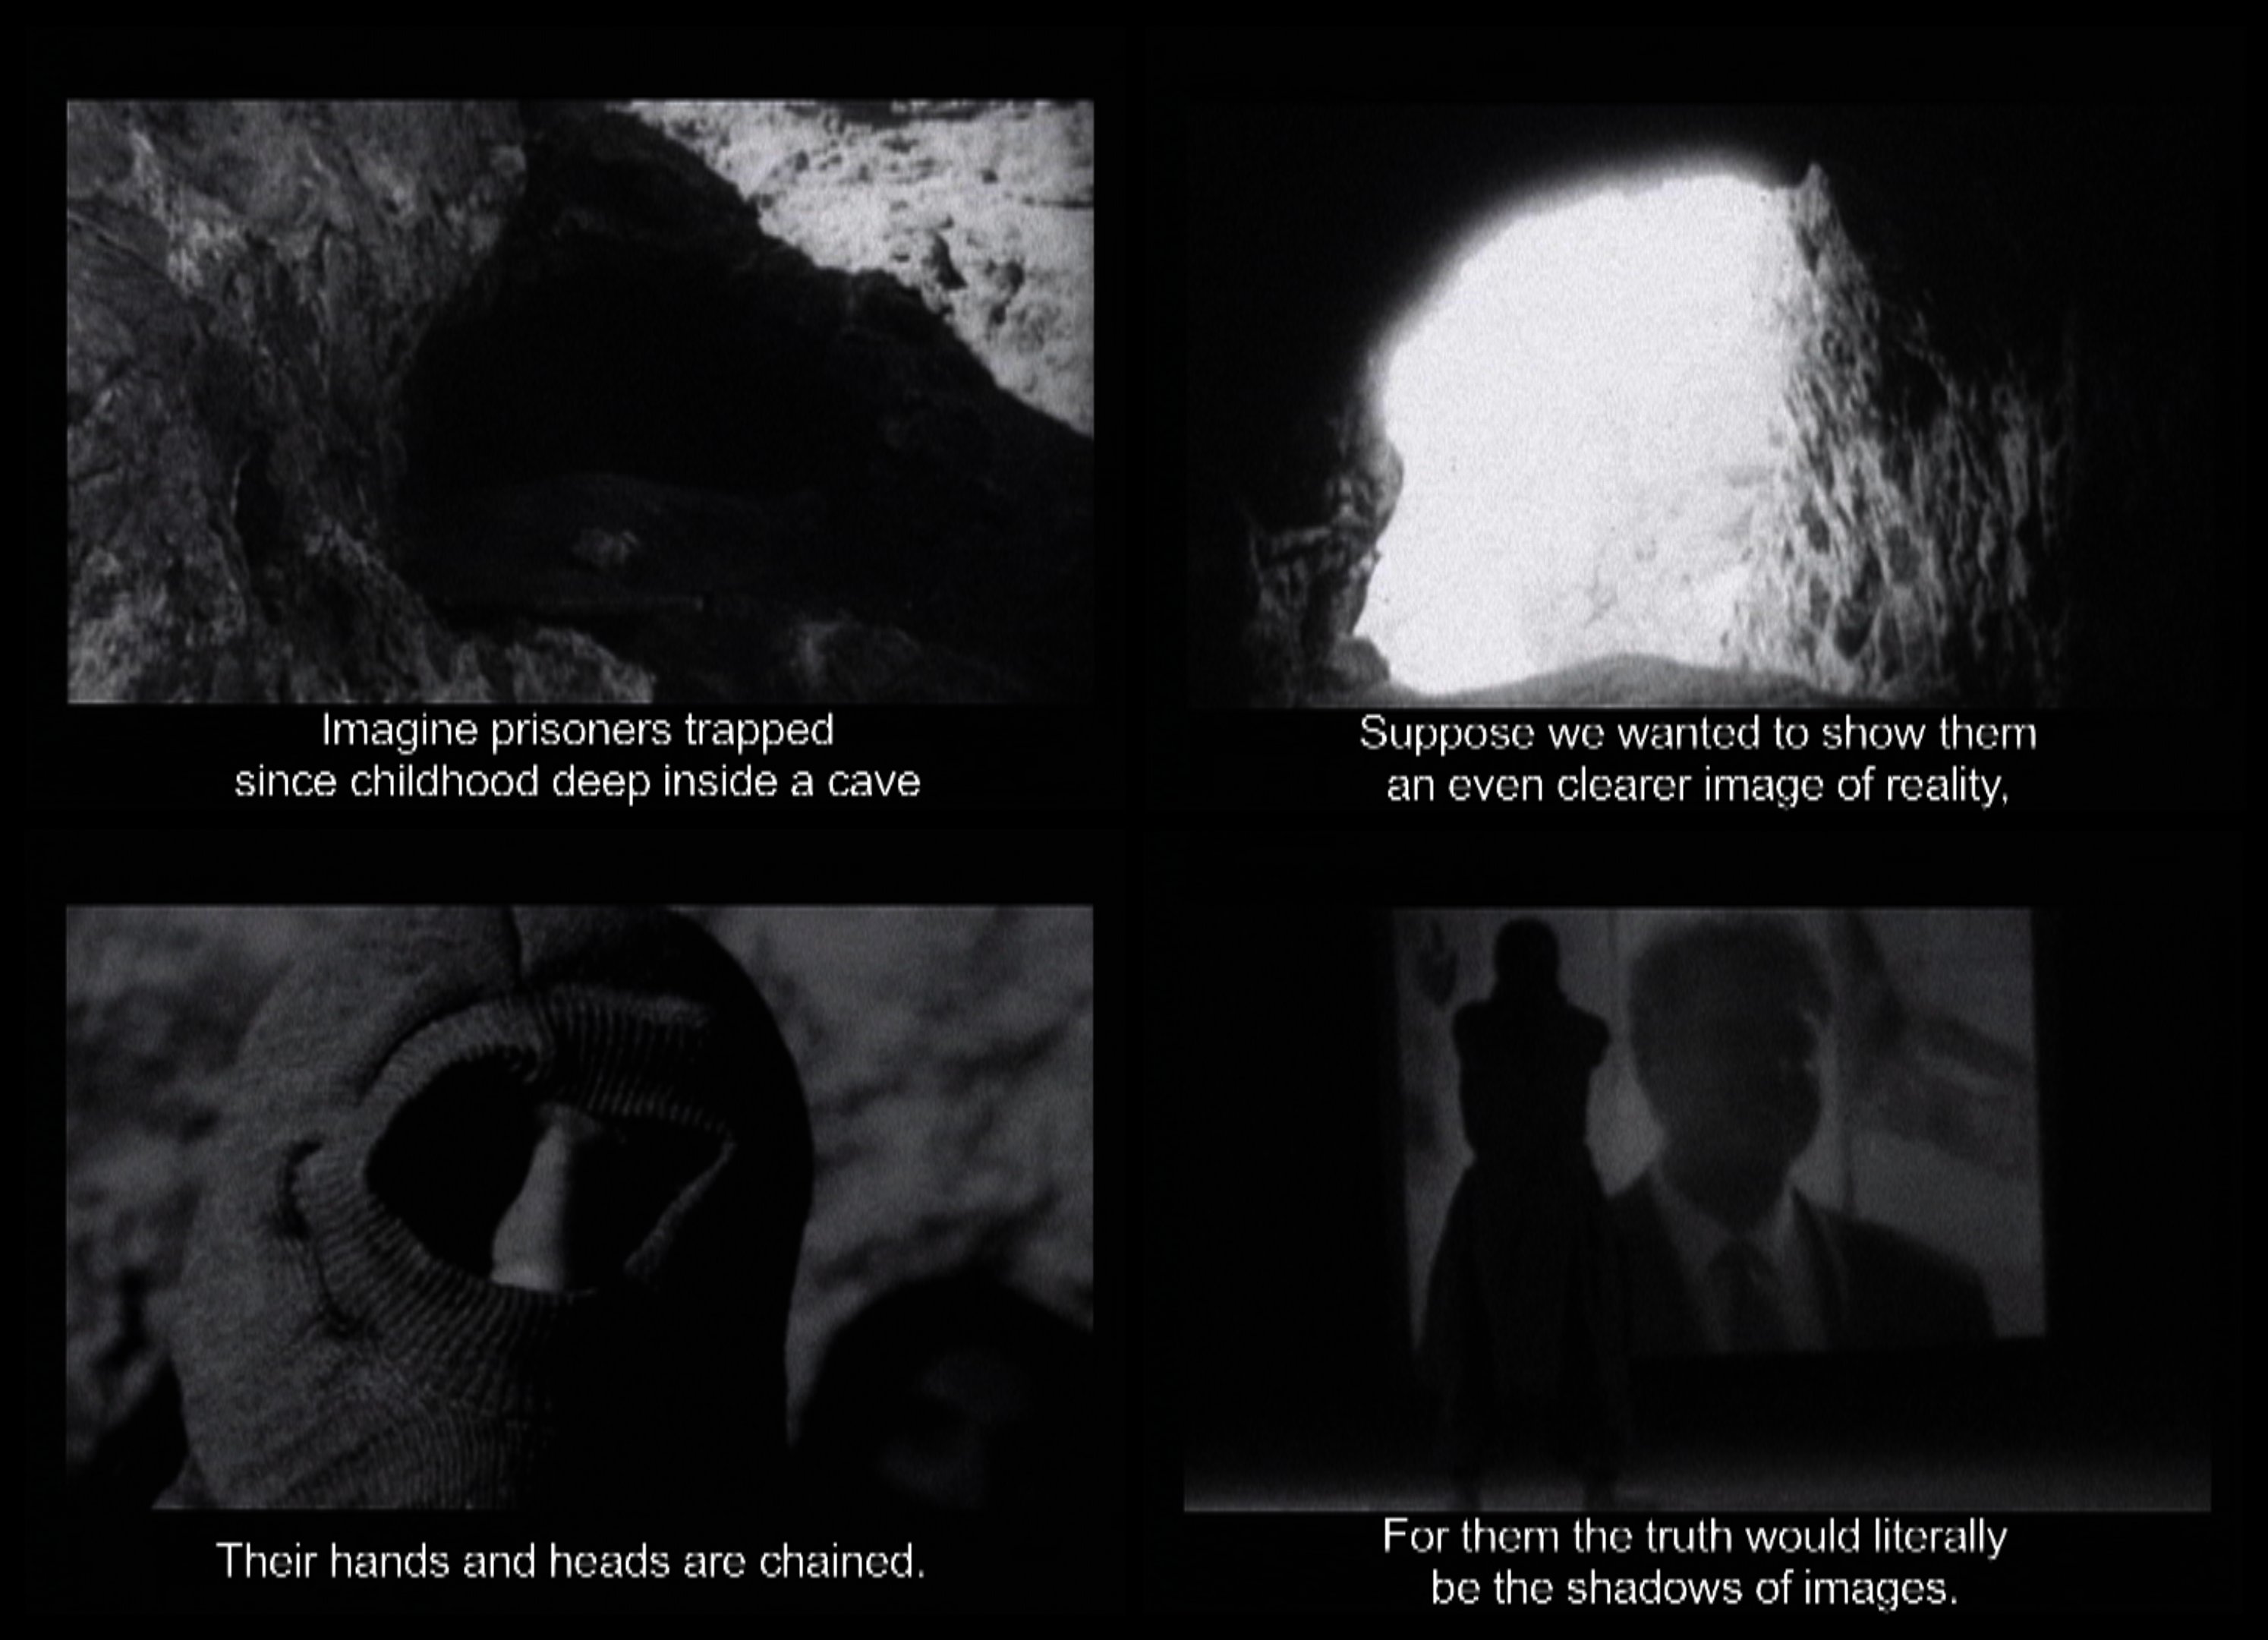 5. VIDEO STILLS FROM THE FORM OF THE GOOD (2006)